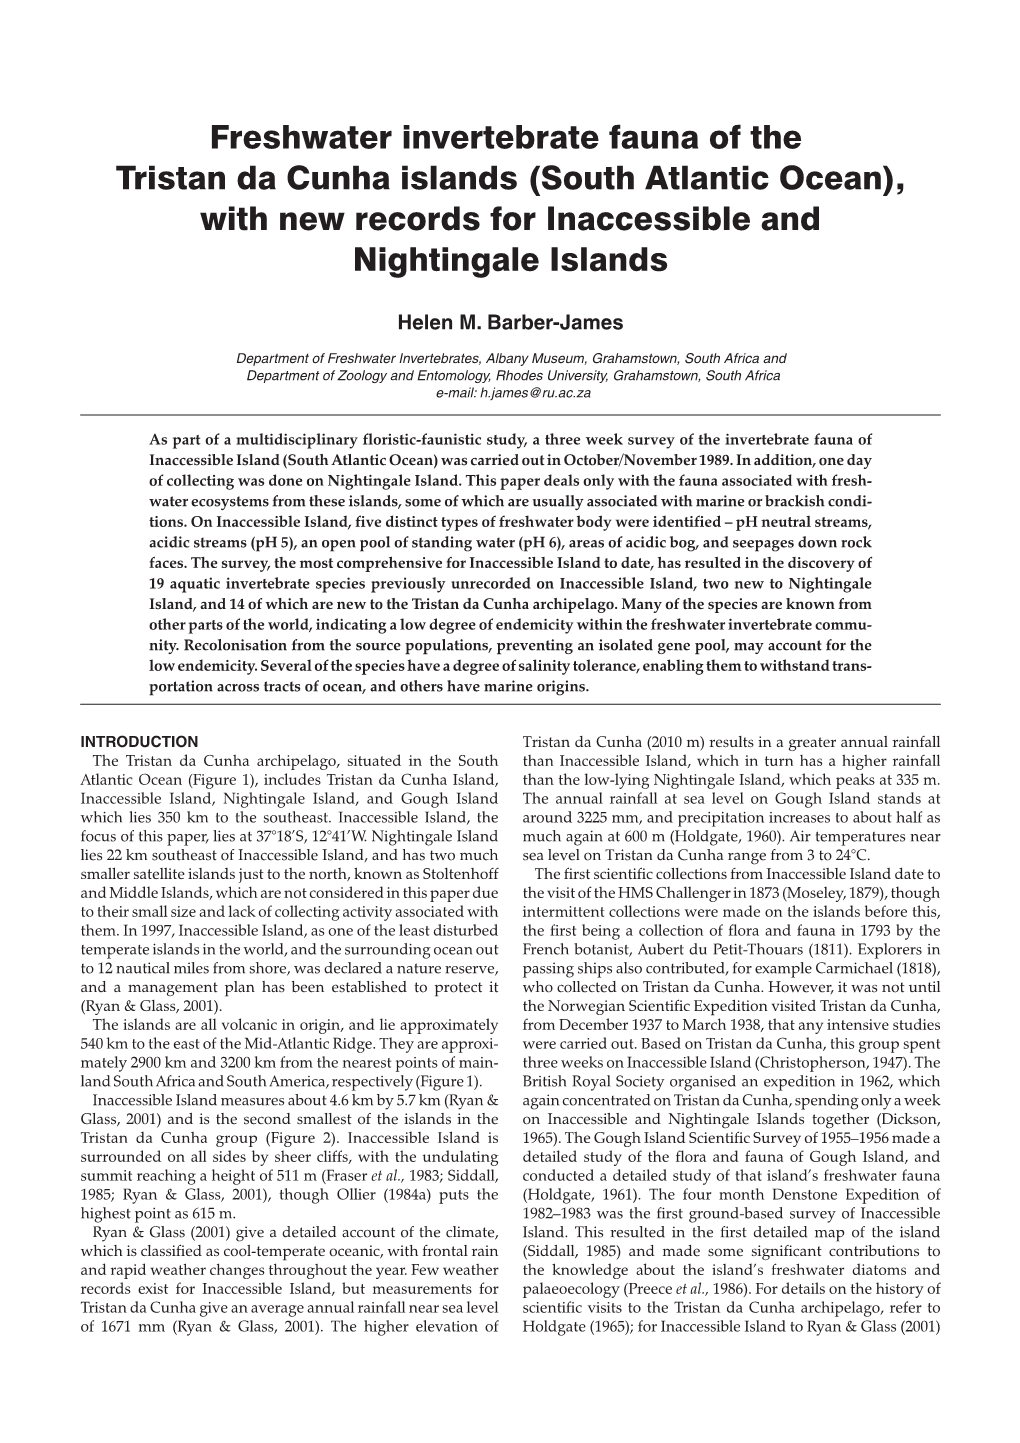 Freshwater Invertebrate Fauna of the Tristan Da Cunha Islands (South Atlantic Ocean), with New Records for Inaccessible and Nightingale Islands